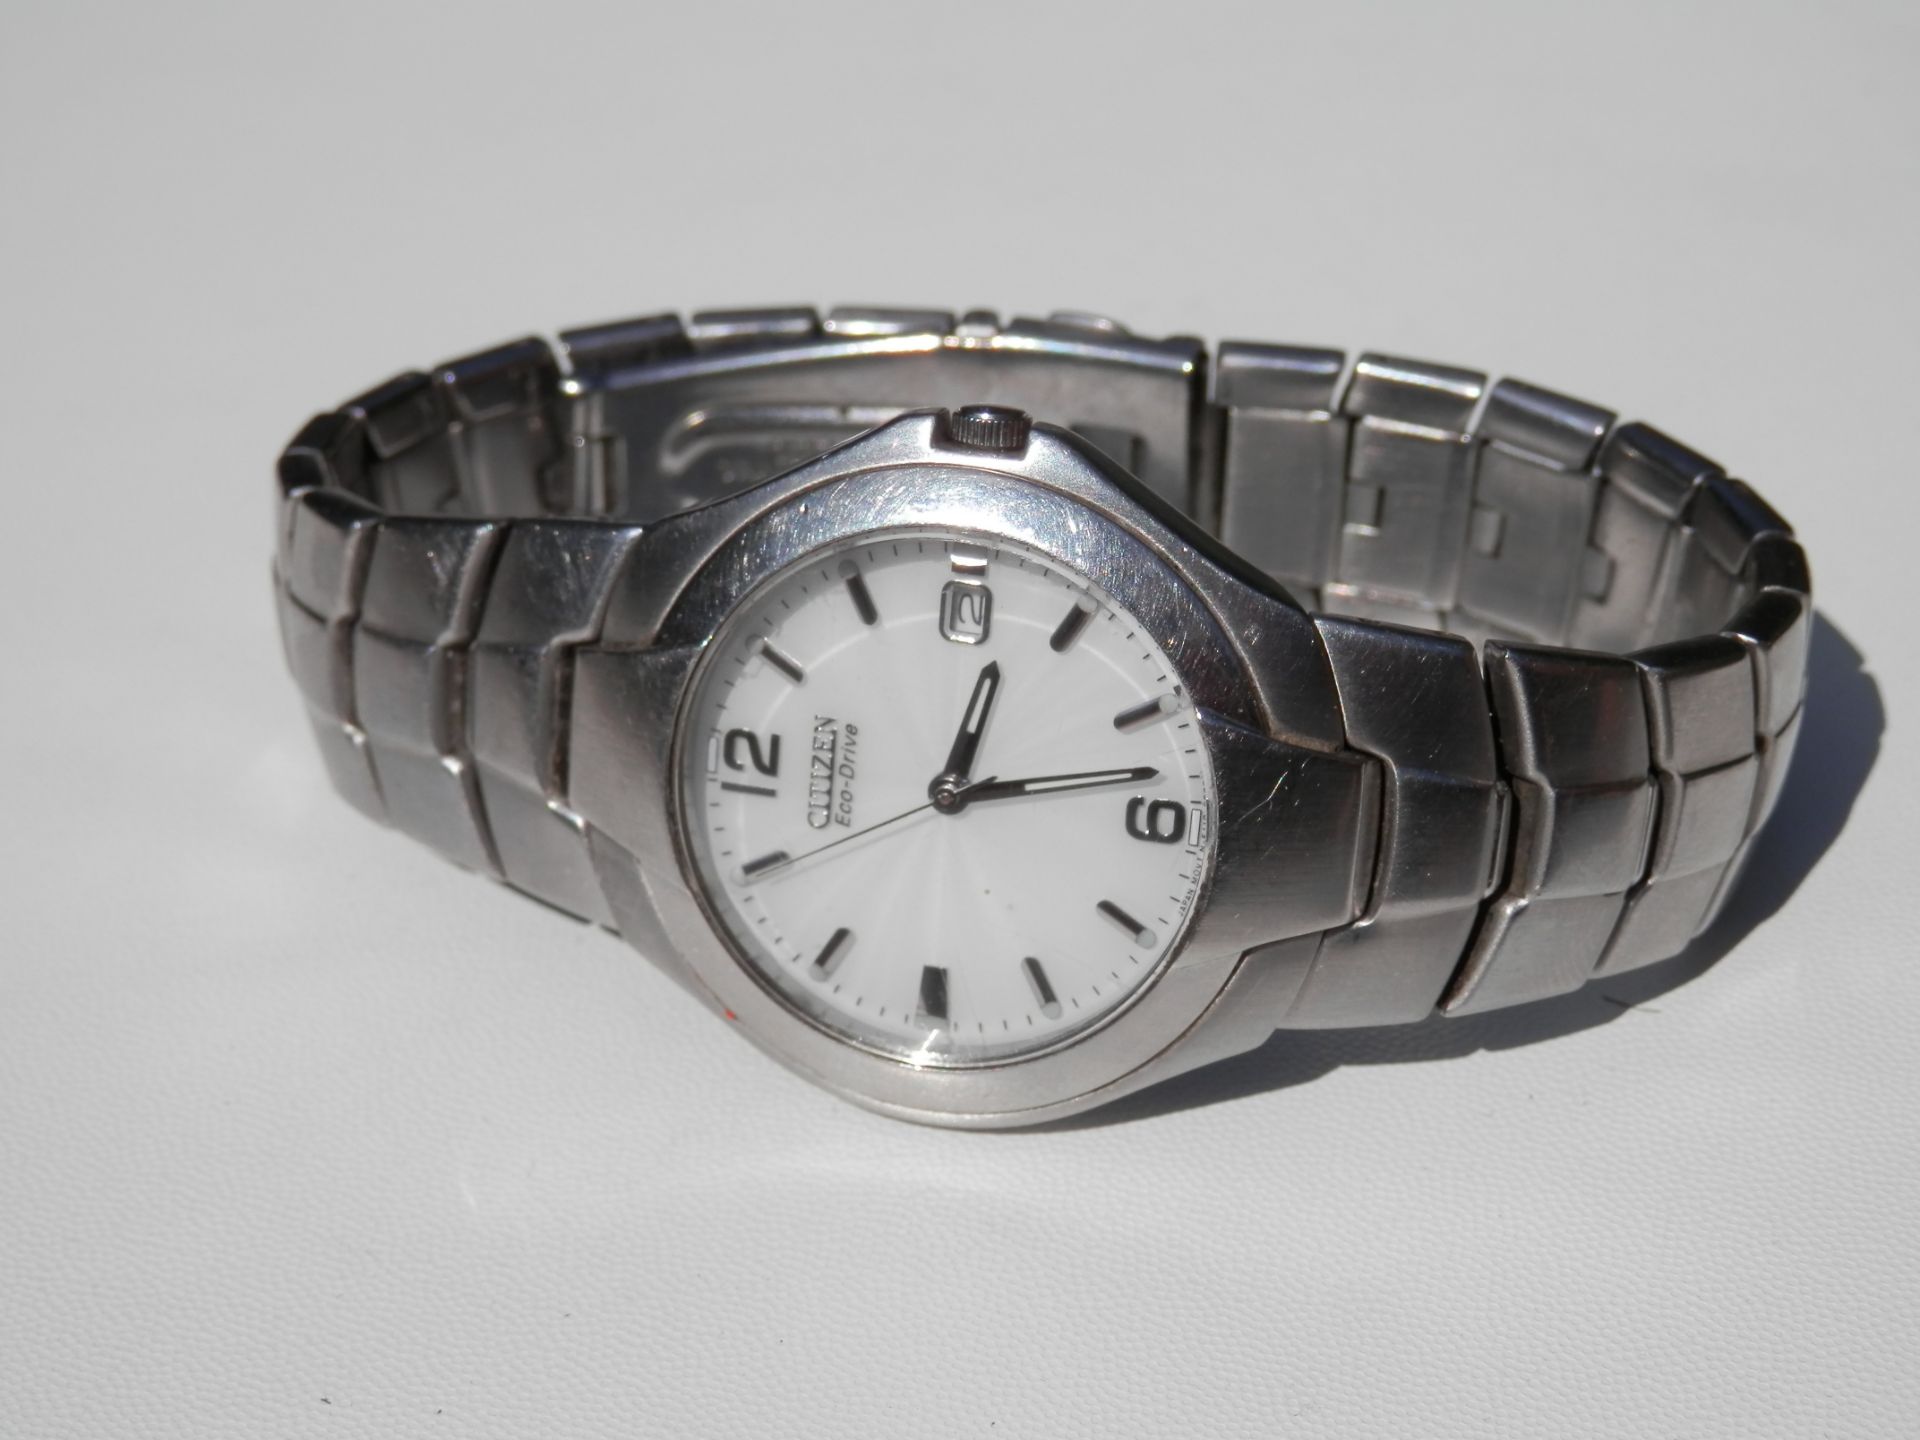 FULL STAINLESS GENTS CITIZEN ECO DRIVE SOLAR POWERED DATE WATCH, WORKING WITH 8"+ STRAP. RRP £189.